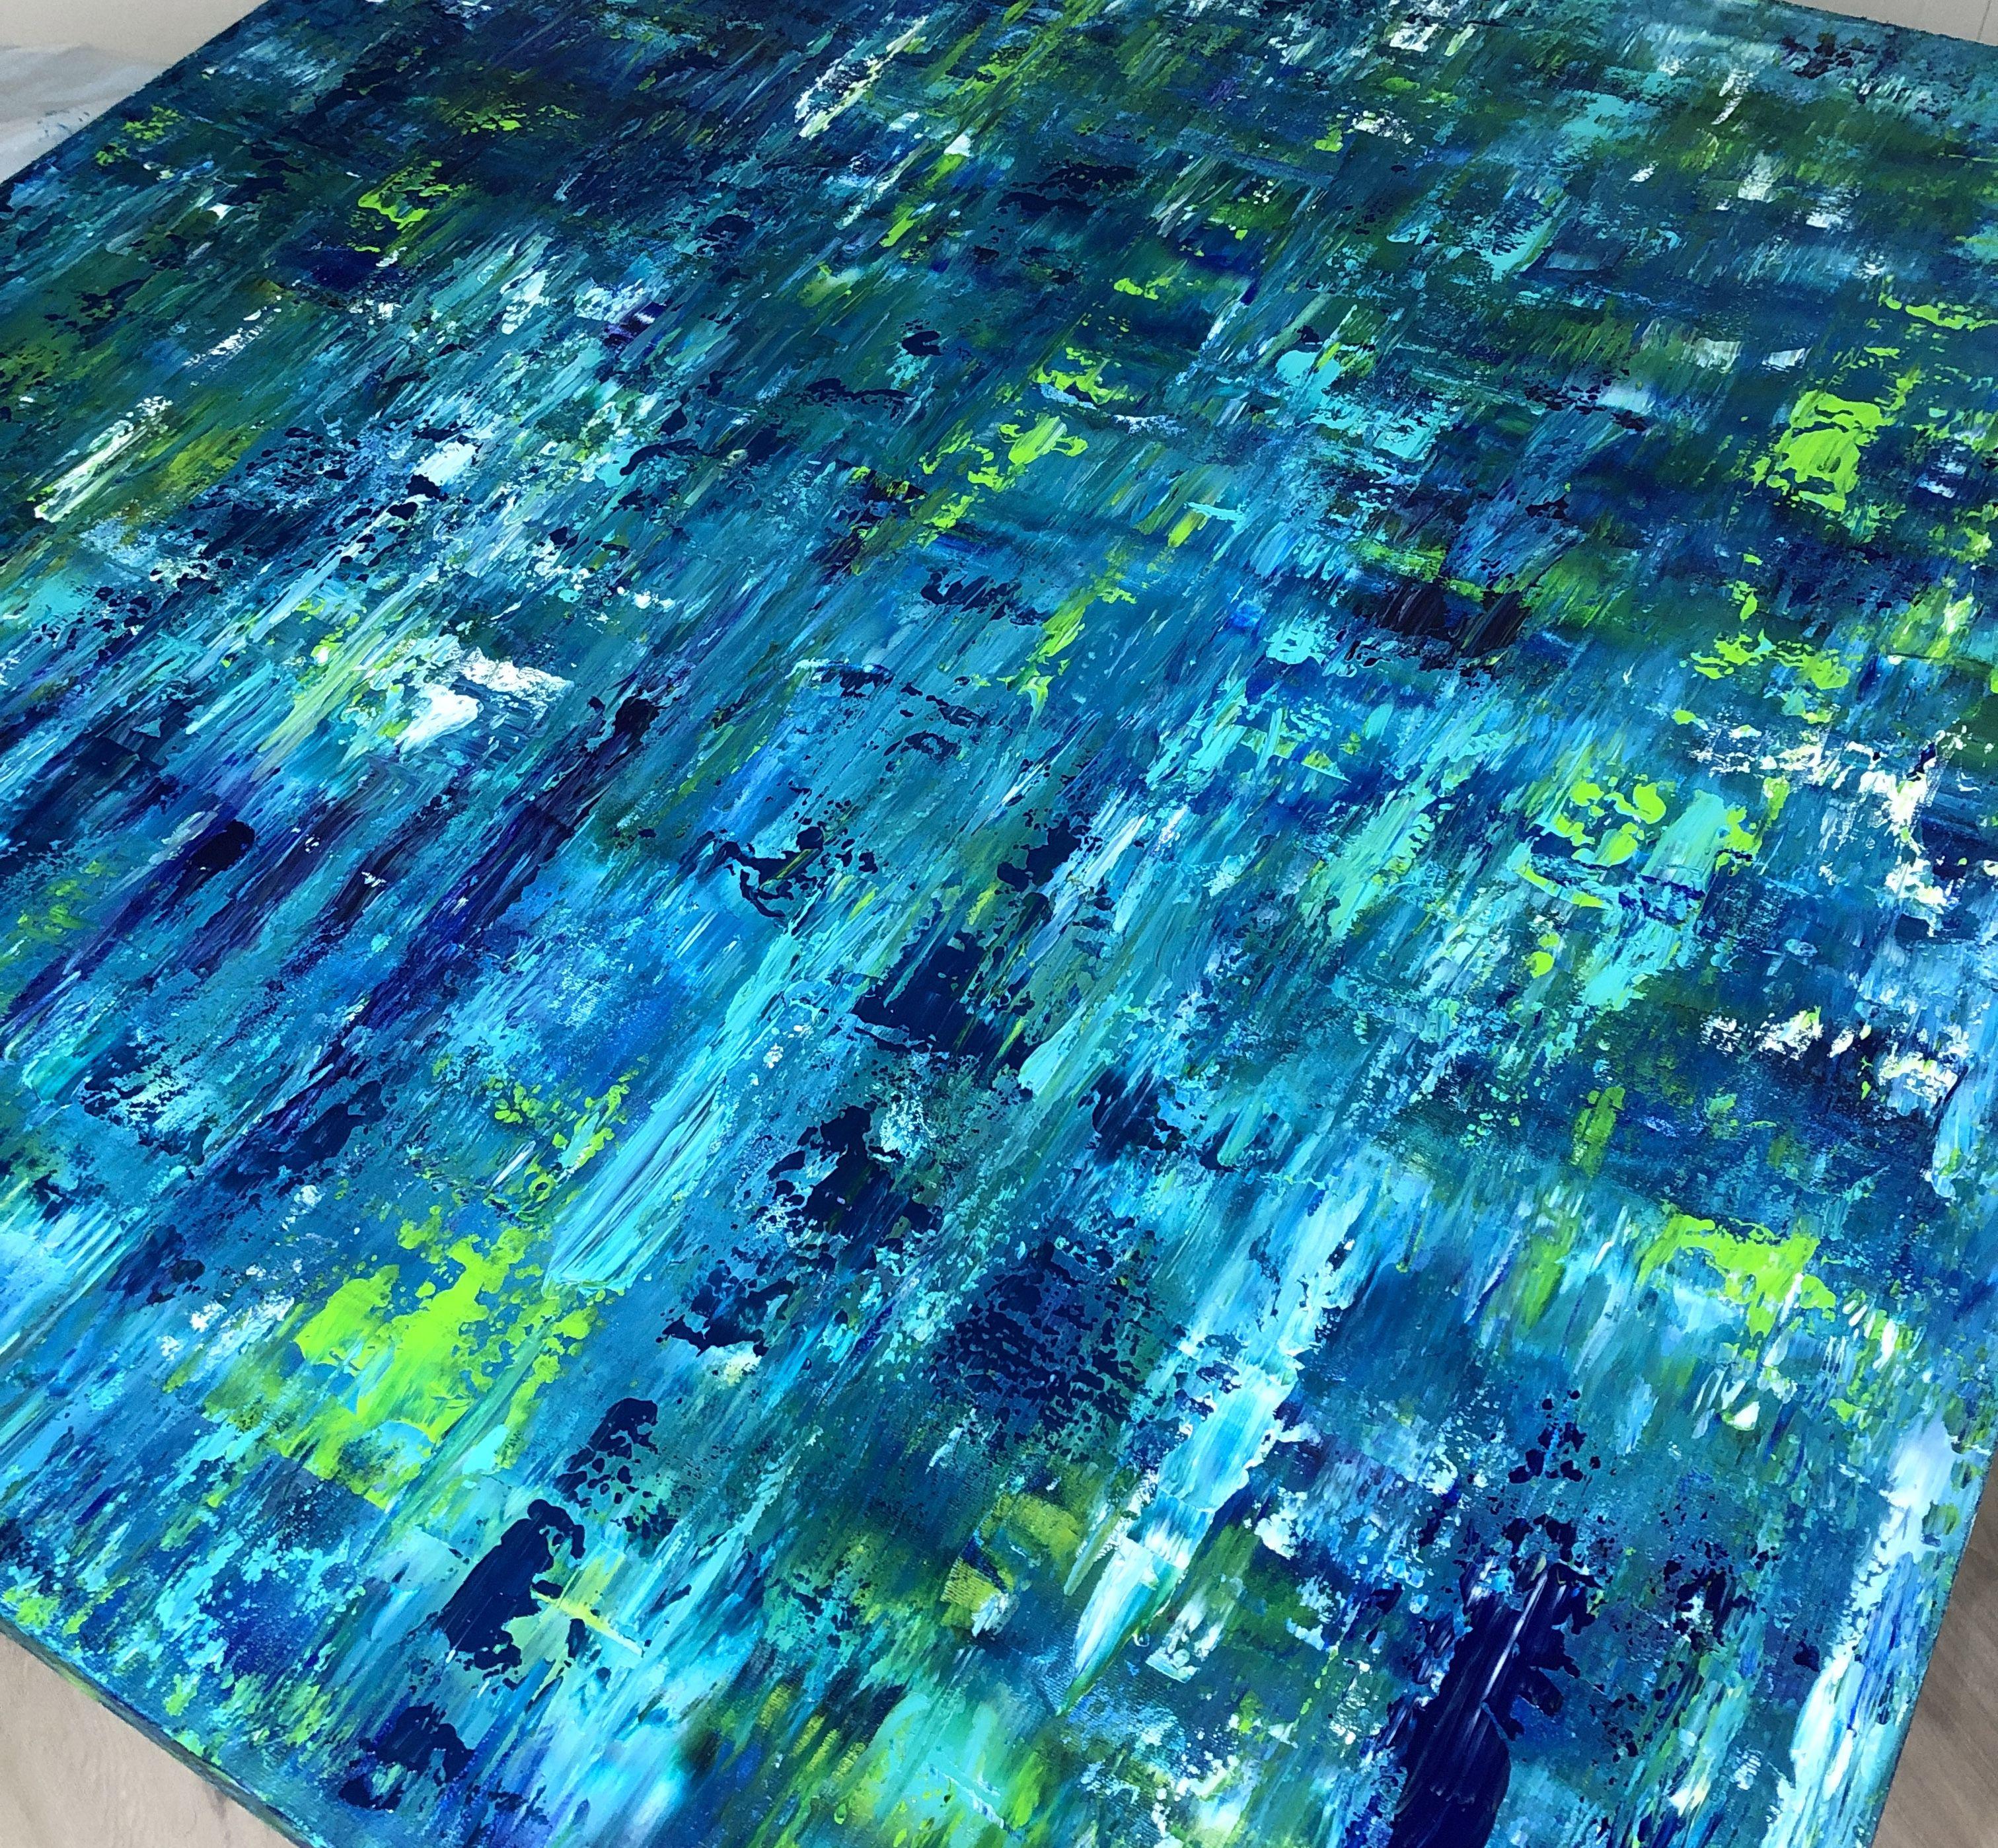 Abstract Waterfall or Abstract Pond ? This contemporary abstract painting has been created by the gestural technique, inspired by Gerhard Richter. Bold colors as Blue, Turquoise, Purple and Green are used to create the impression and the fluidity of